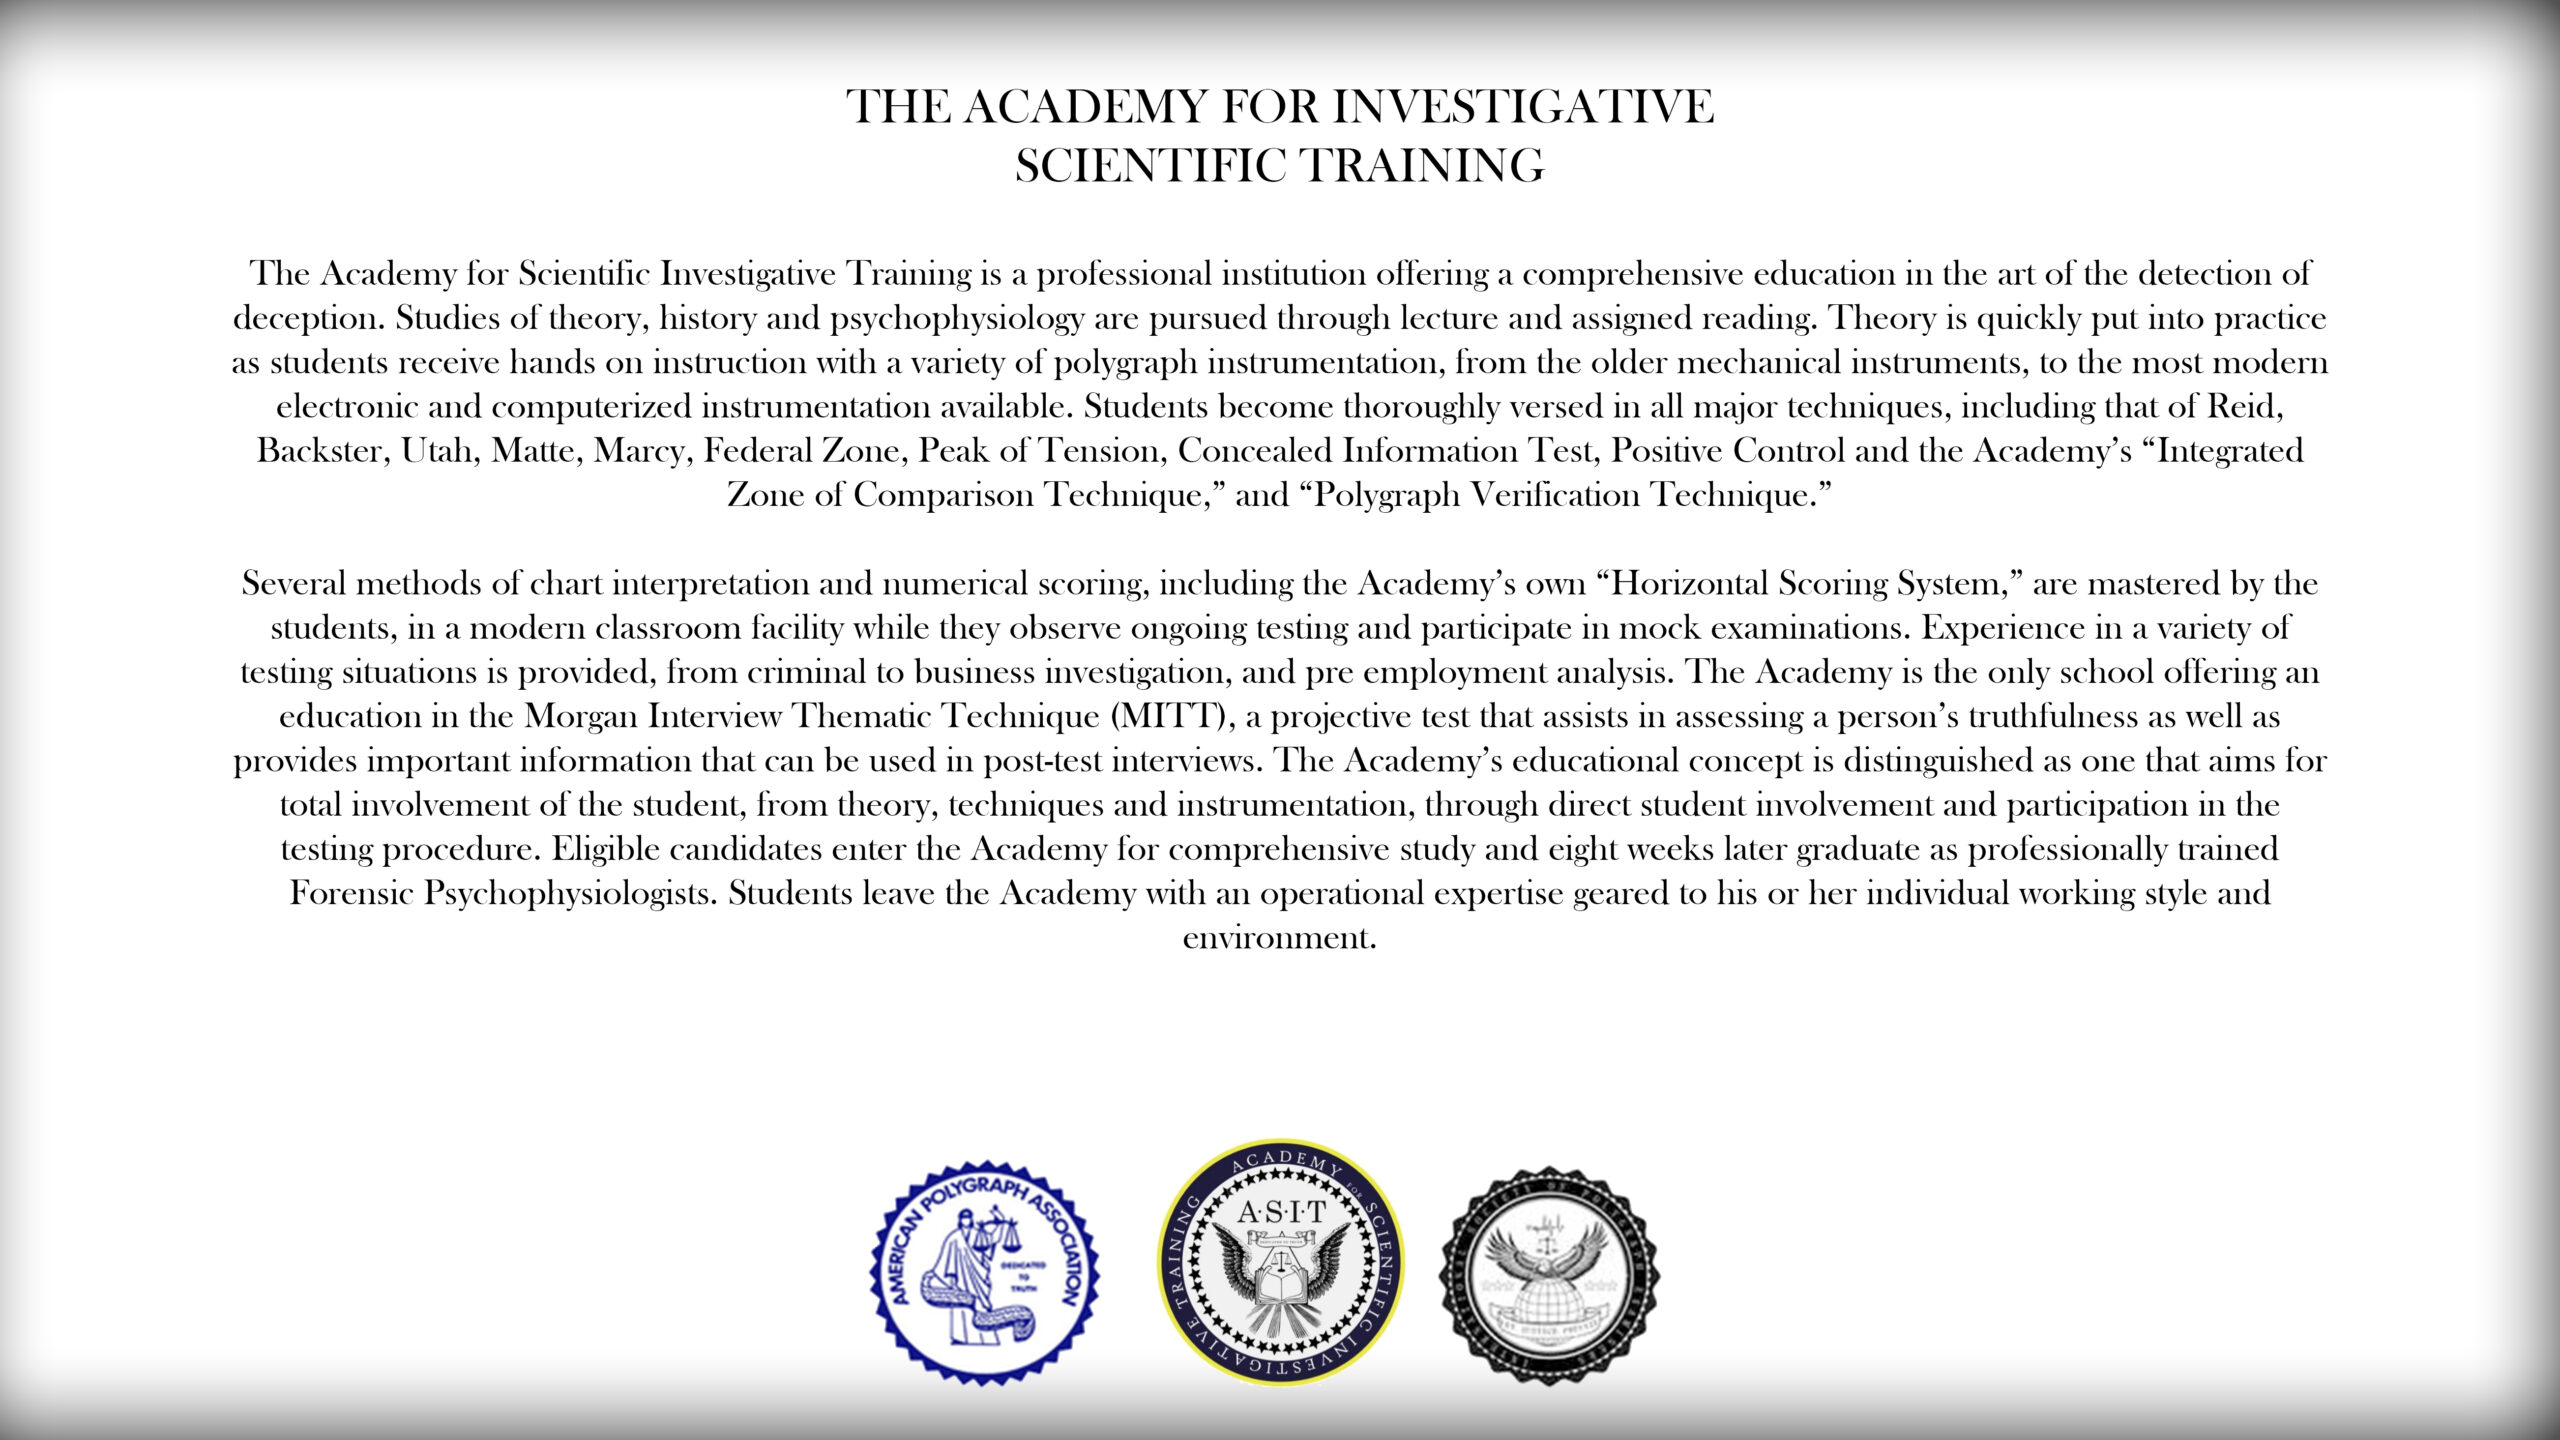 The Academy of Scientific Investigative Training is a professional institution offering a comprehensive education in the art of the detection of deception.